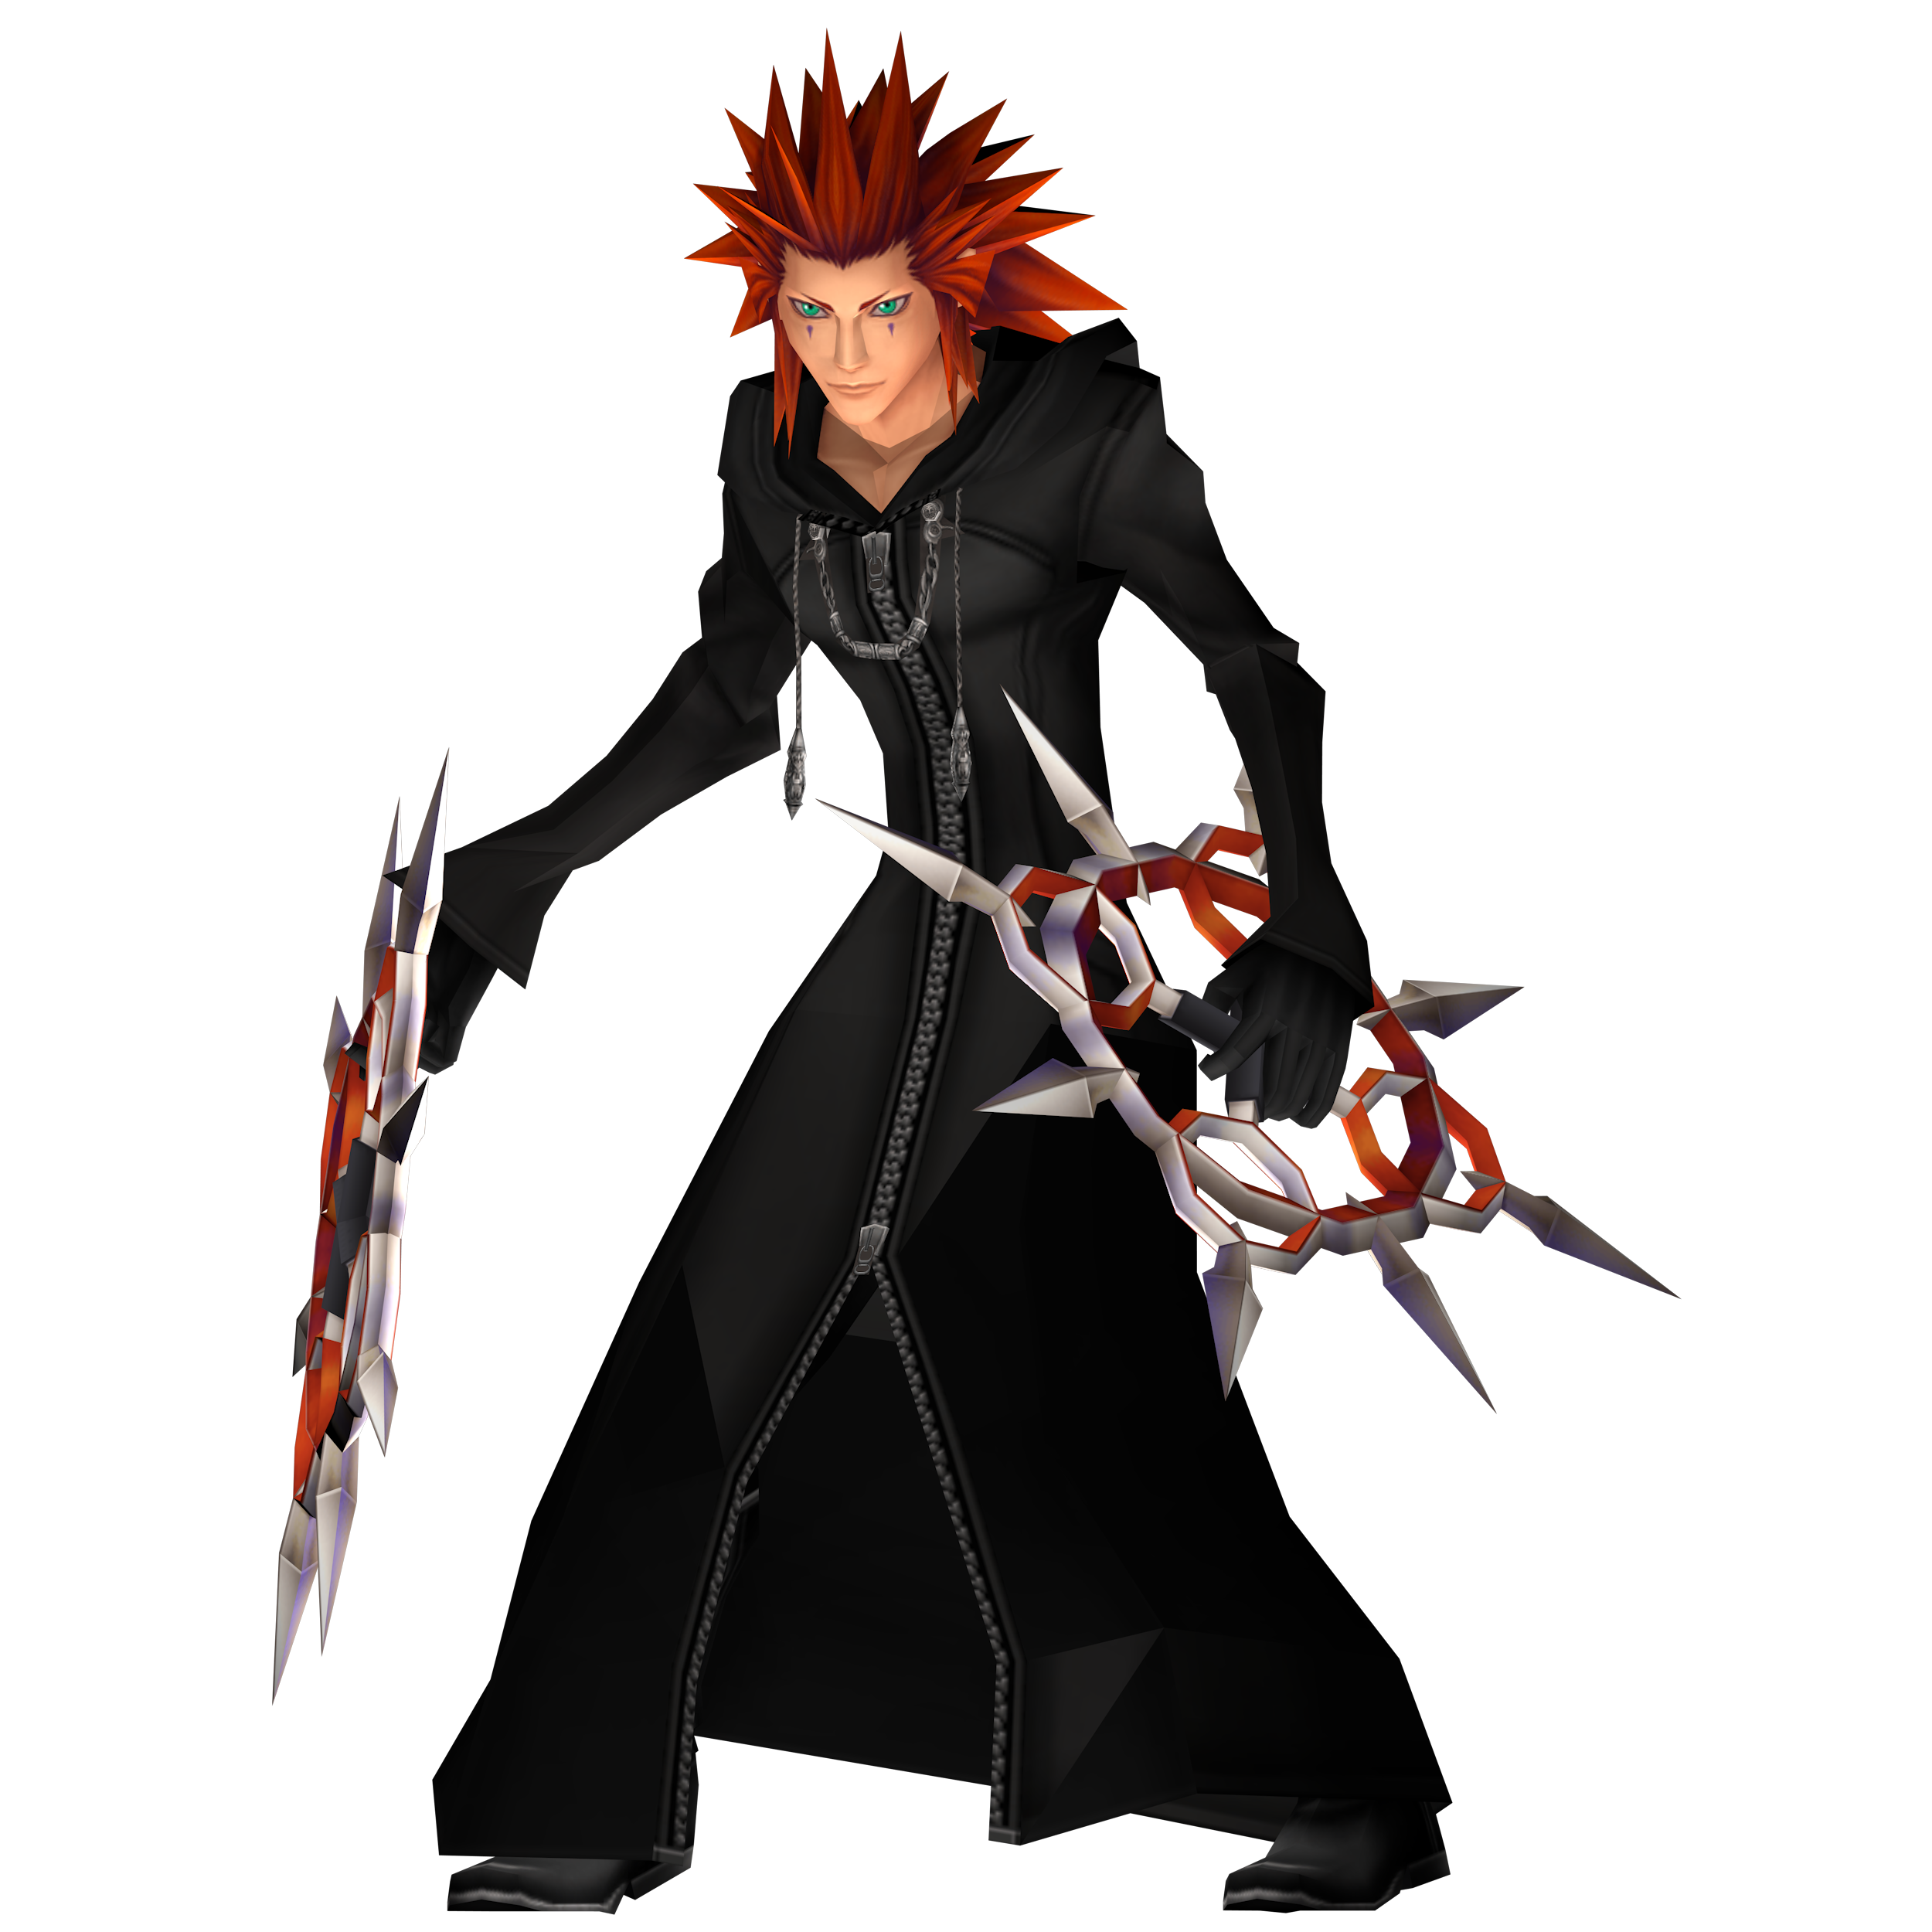 #Kingdom Hearts 2 Final Mix - Axel Attack Render by SonicOnBox on ...